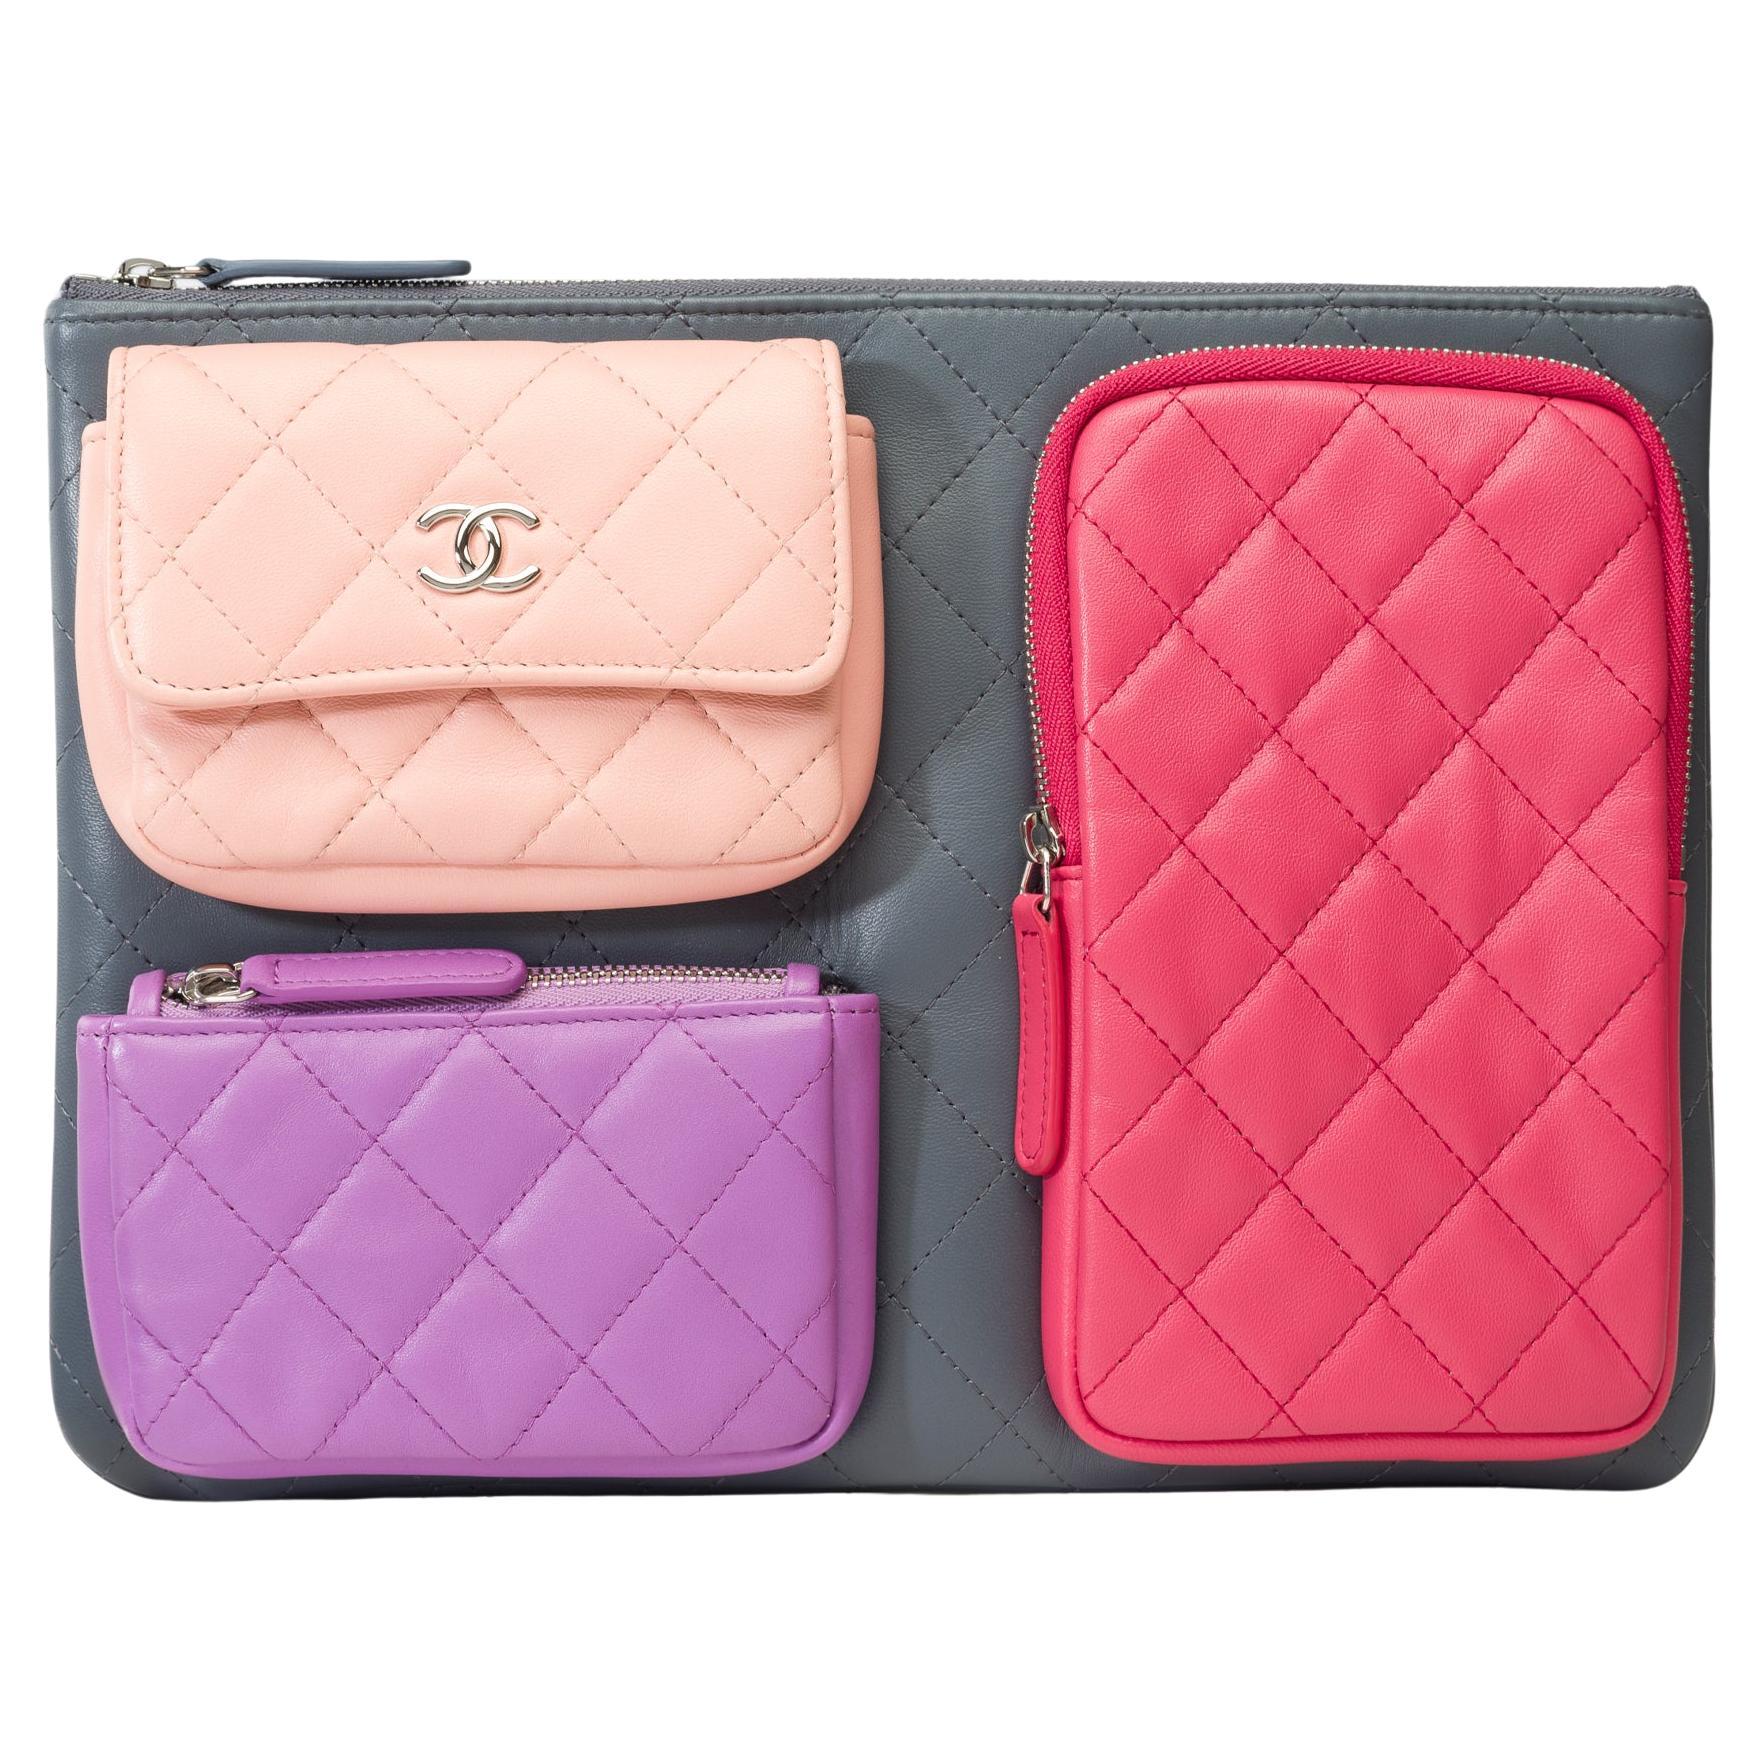 Limited Edition Chanel Pouch/Clutch in multicolor quilted leather, SHW For Sale